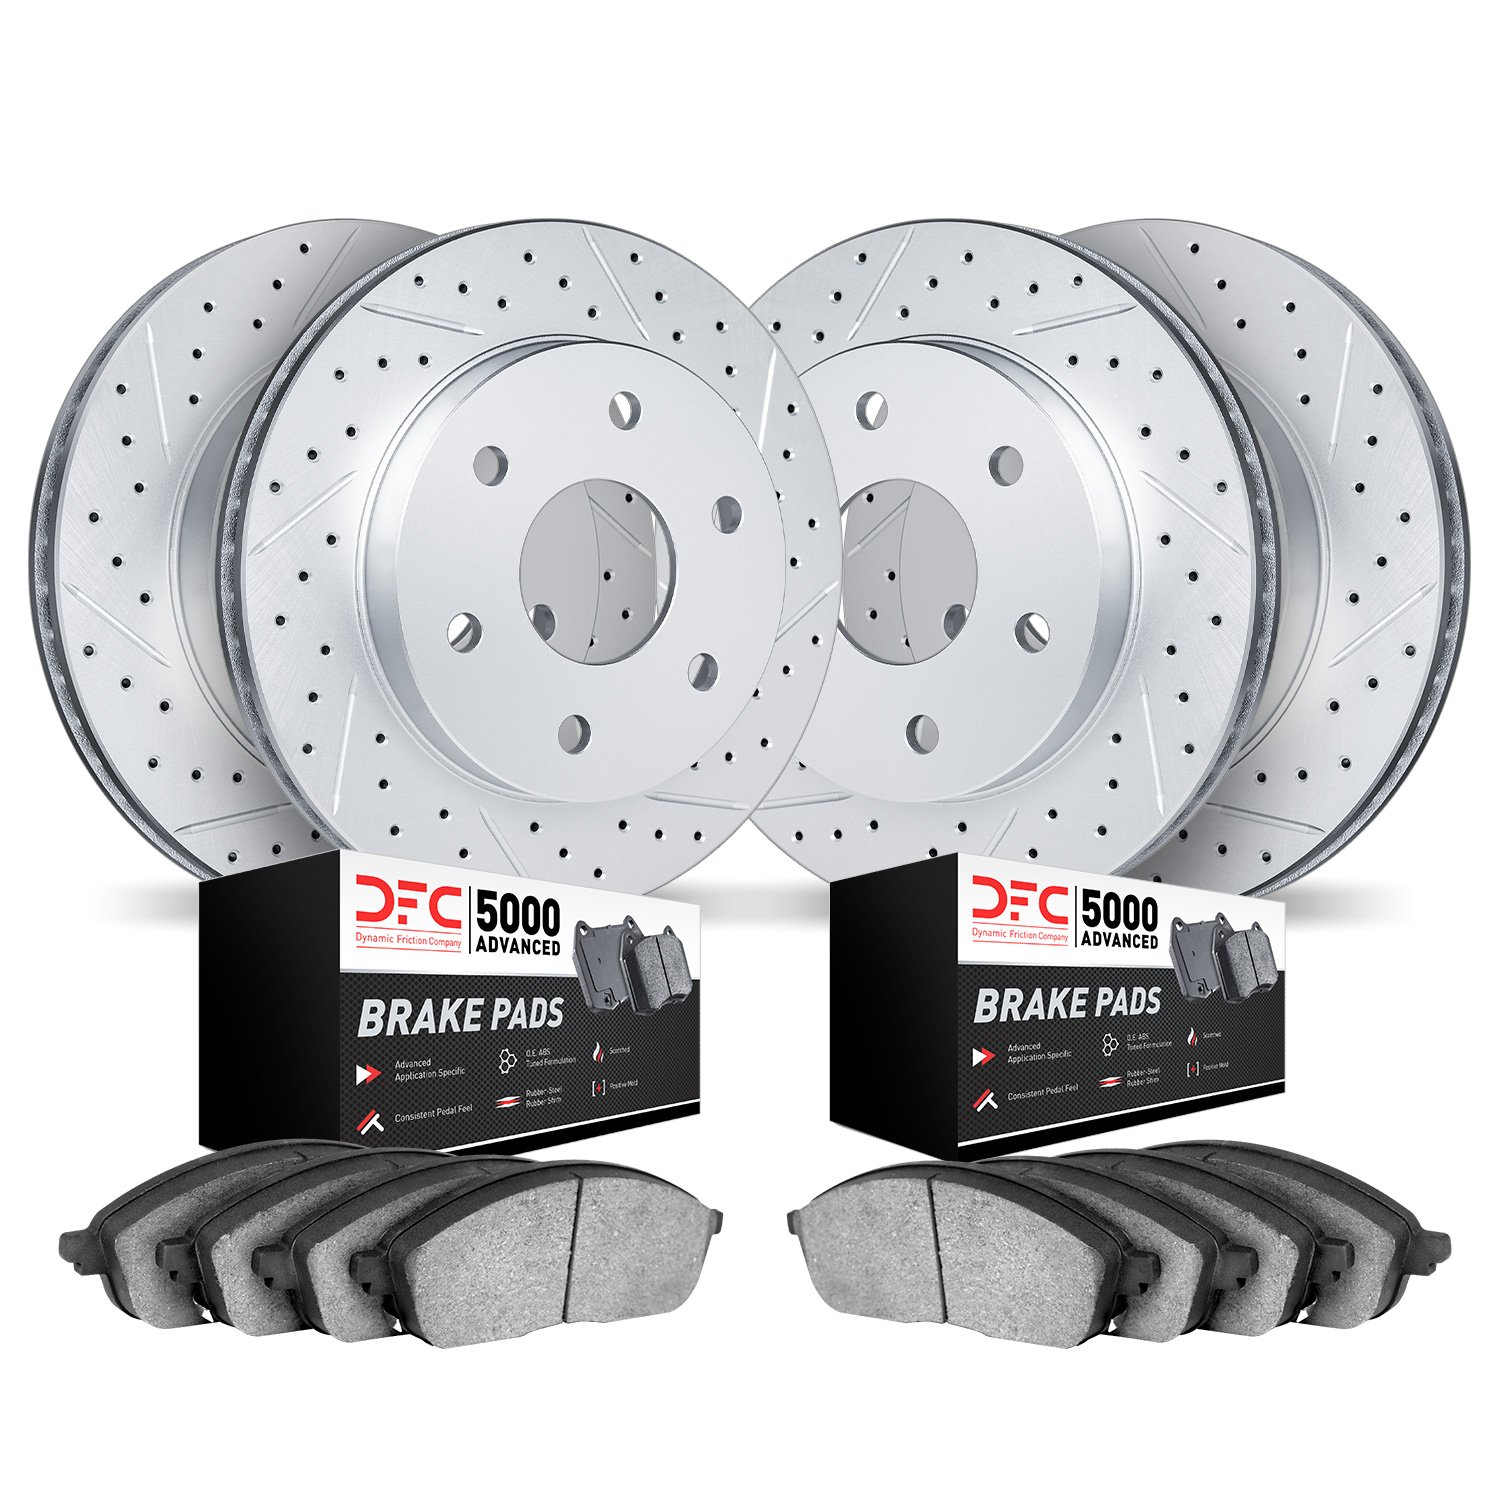 2504-48049 Geoperformance Drilled/Slotted Rotors w/5000 Advanced Brake Pads Kit, 2015-2020 GM, Position: Front and Rear